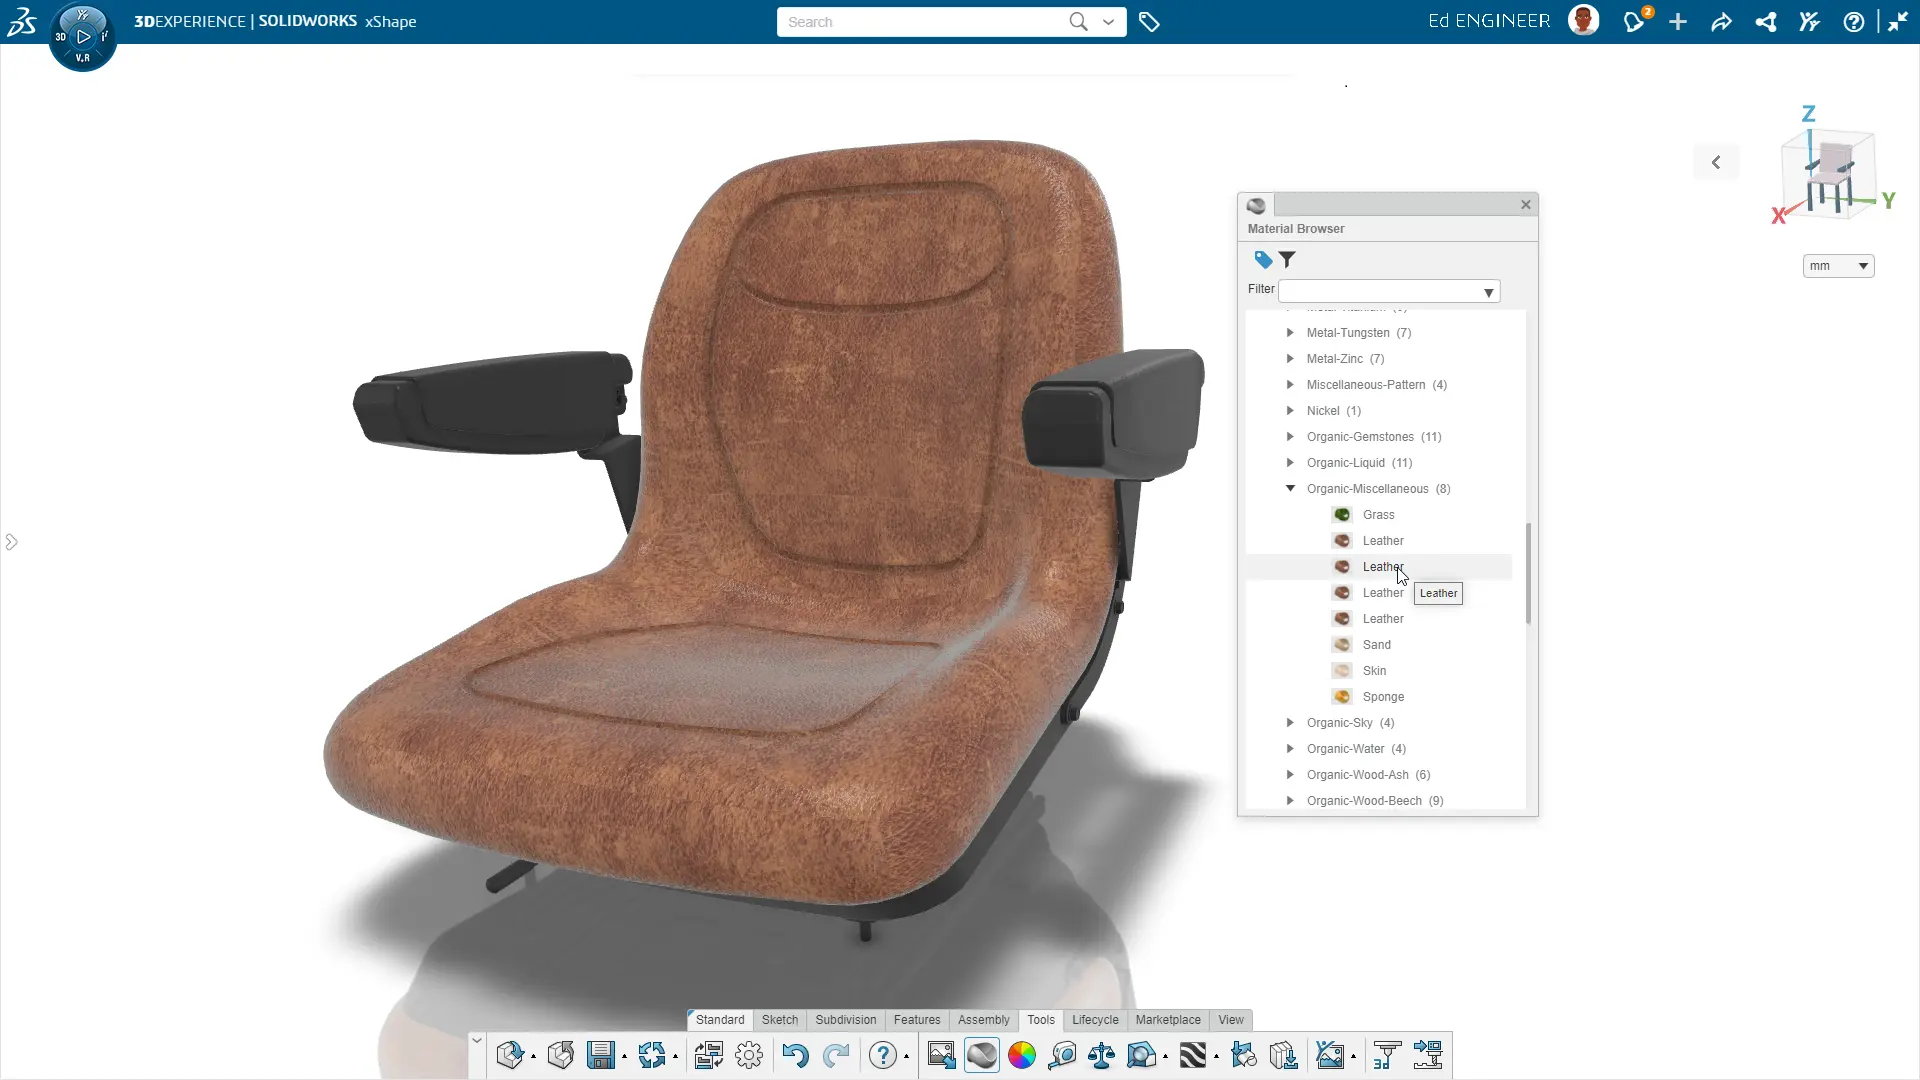 Completed ergonomic leather chair modelled in xShape.